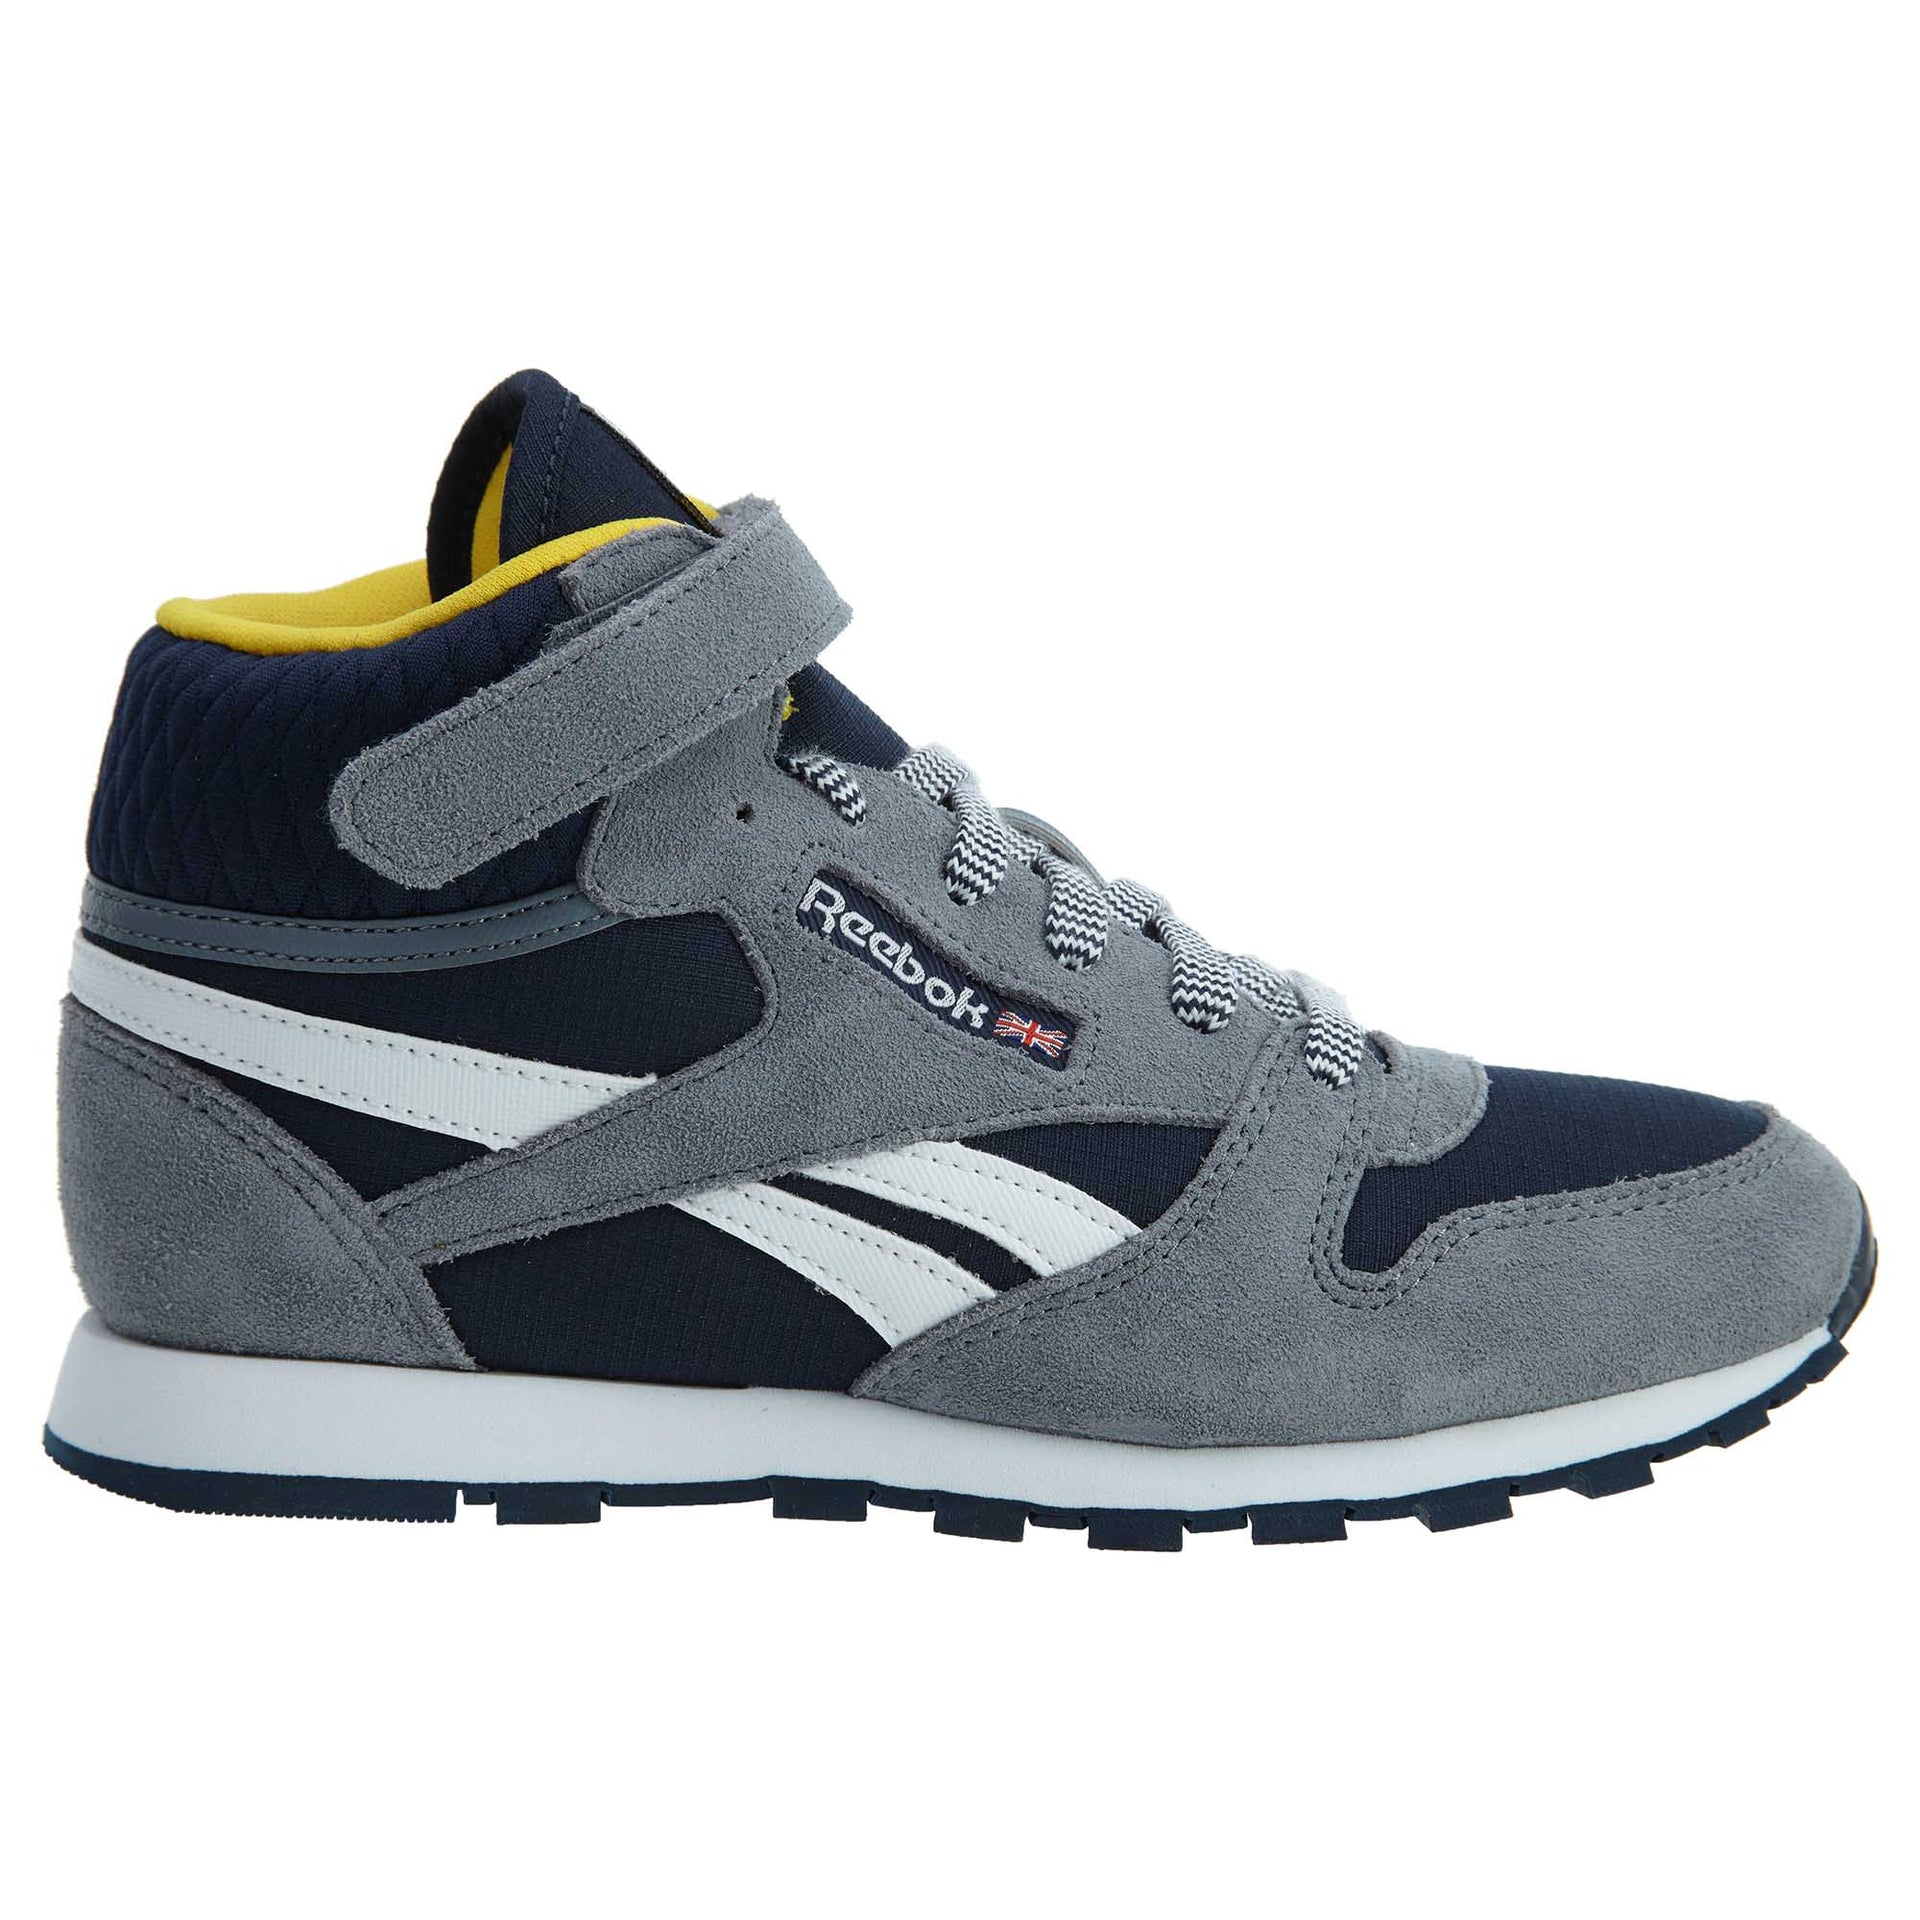 Reebok Classic Leather Mid Strap Little Kids Style : Bs5610